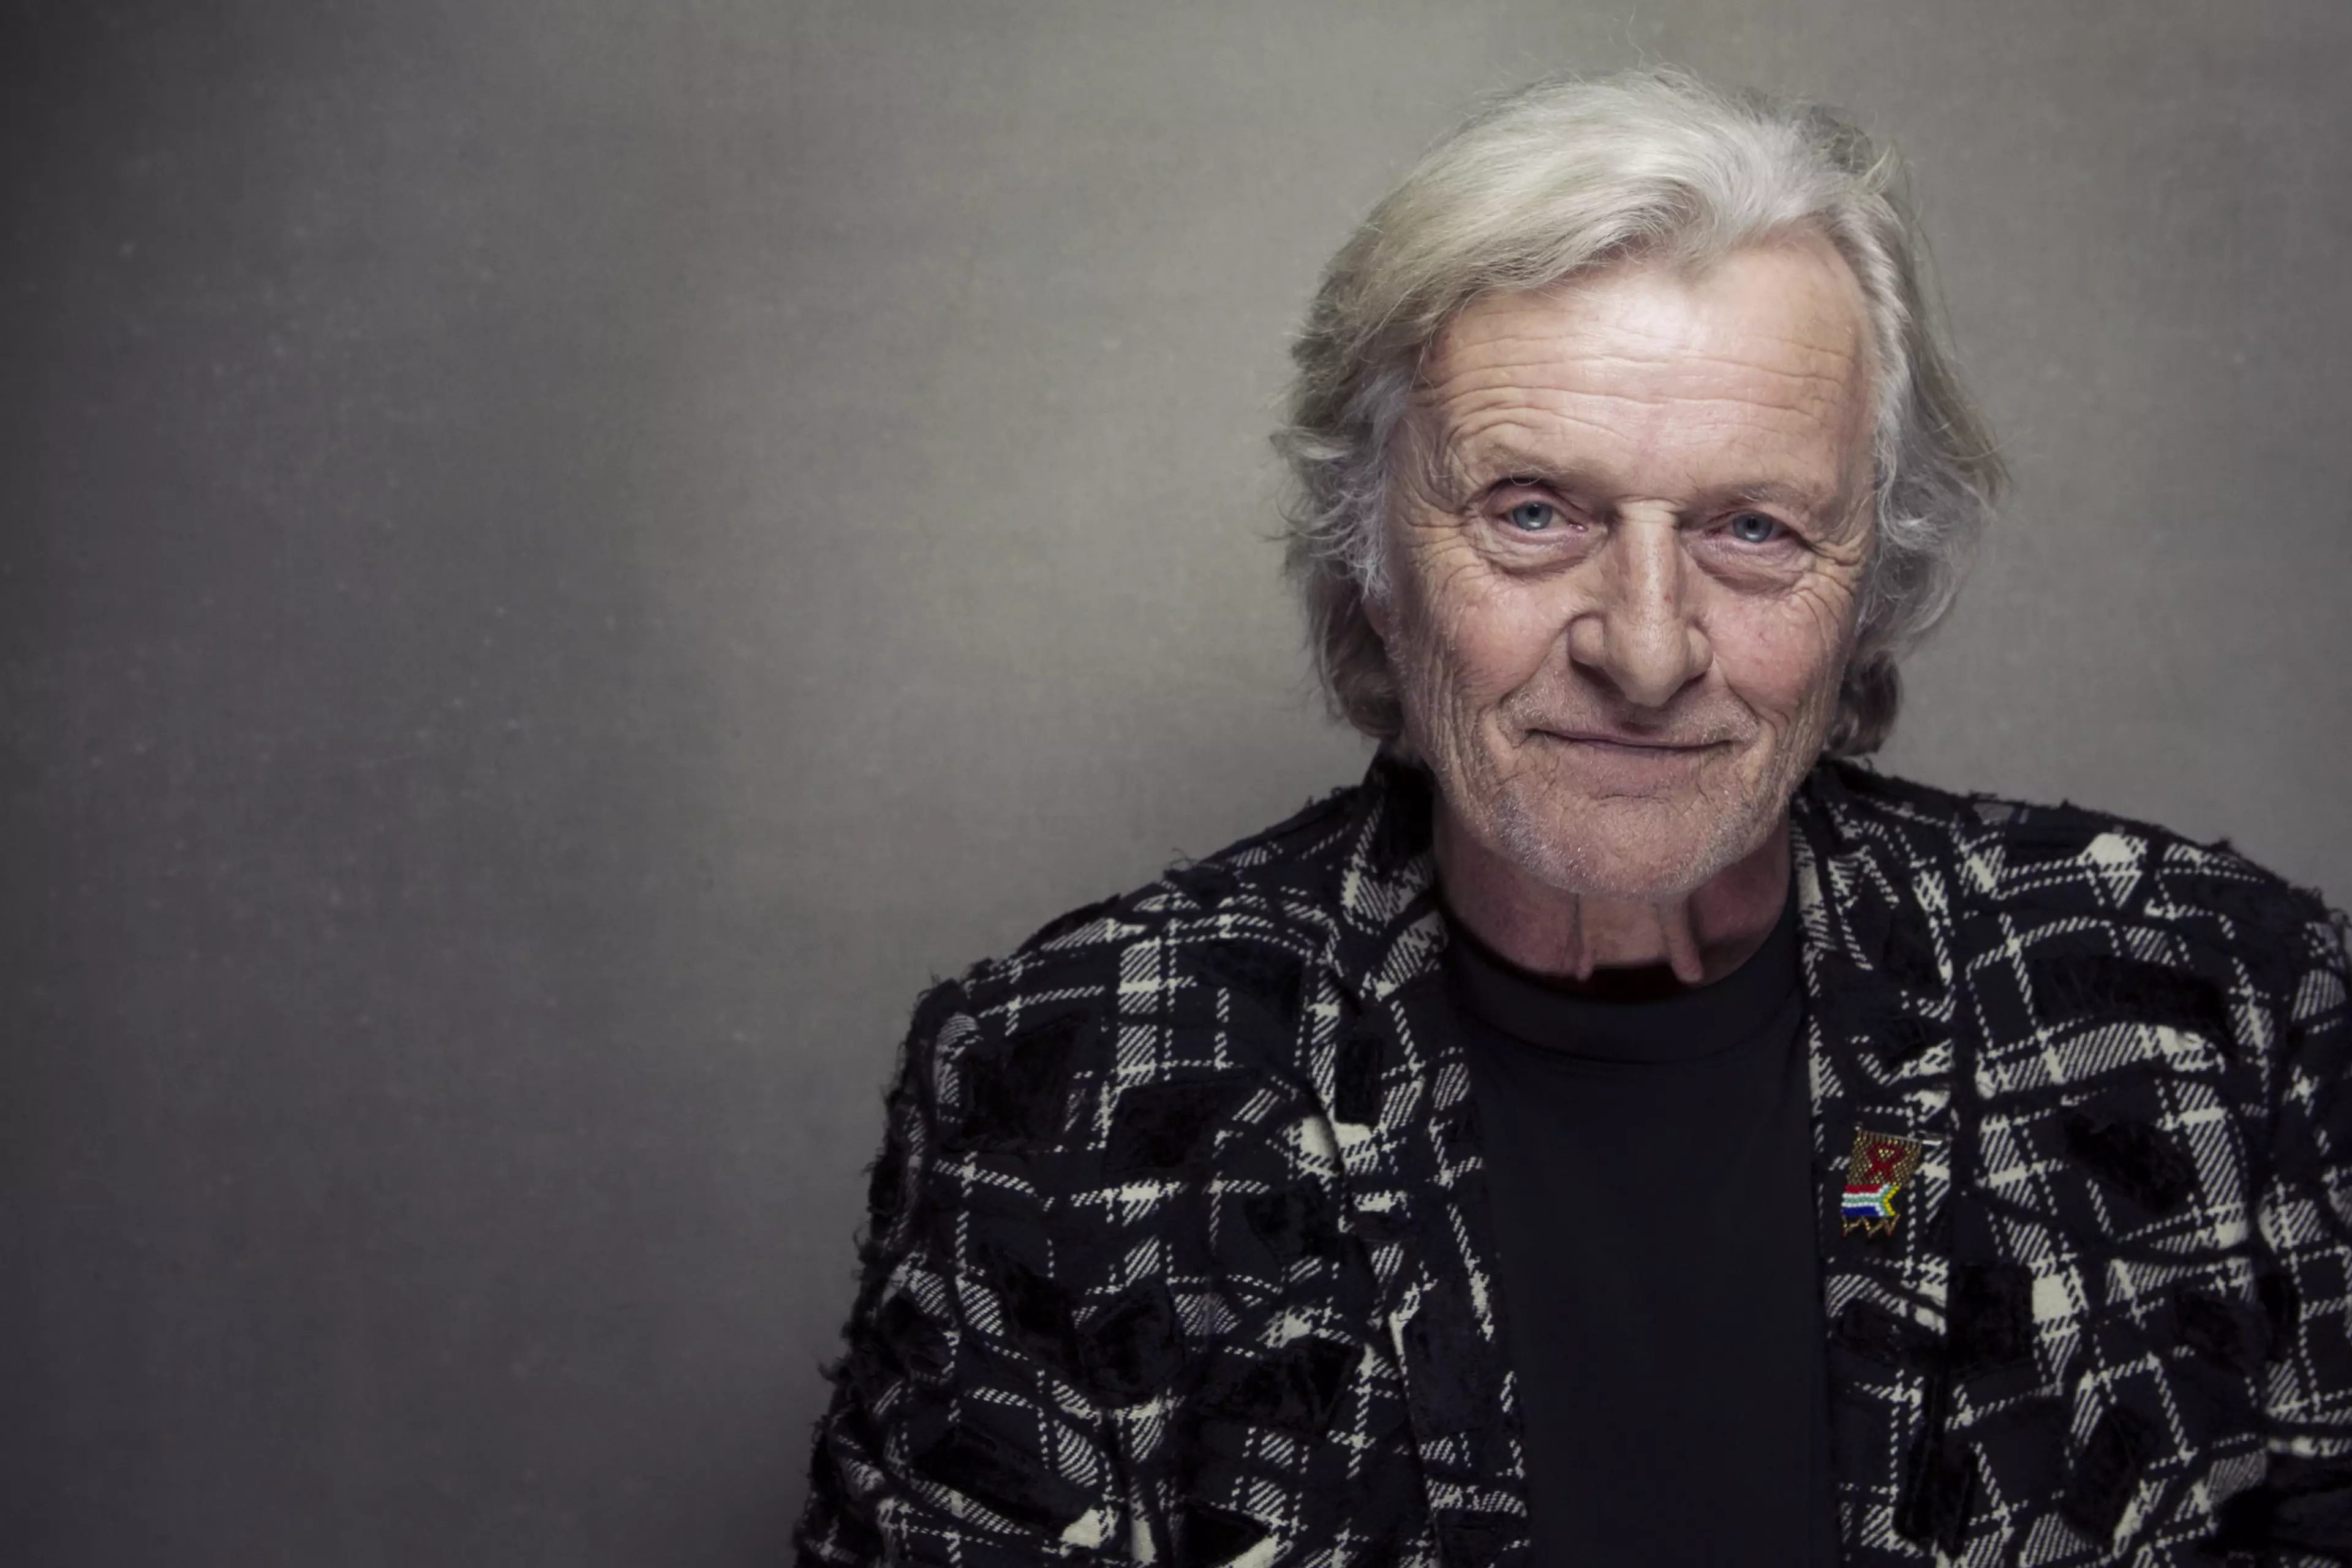 Rutger Hauer has died aged 75.